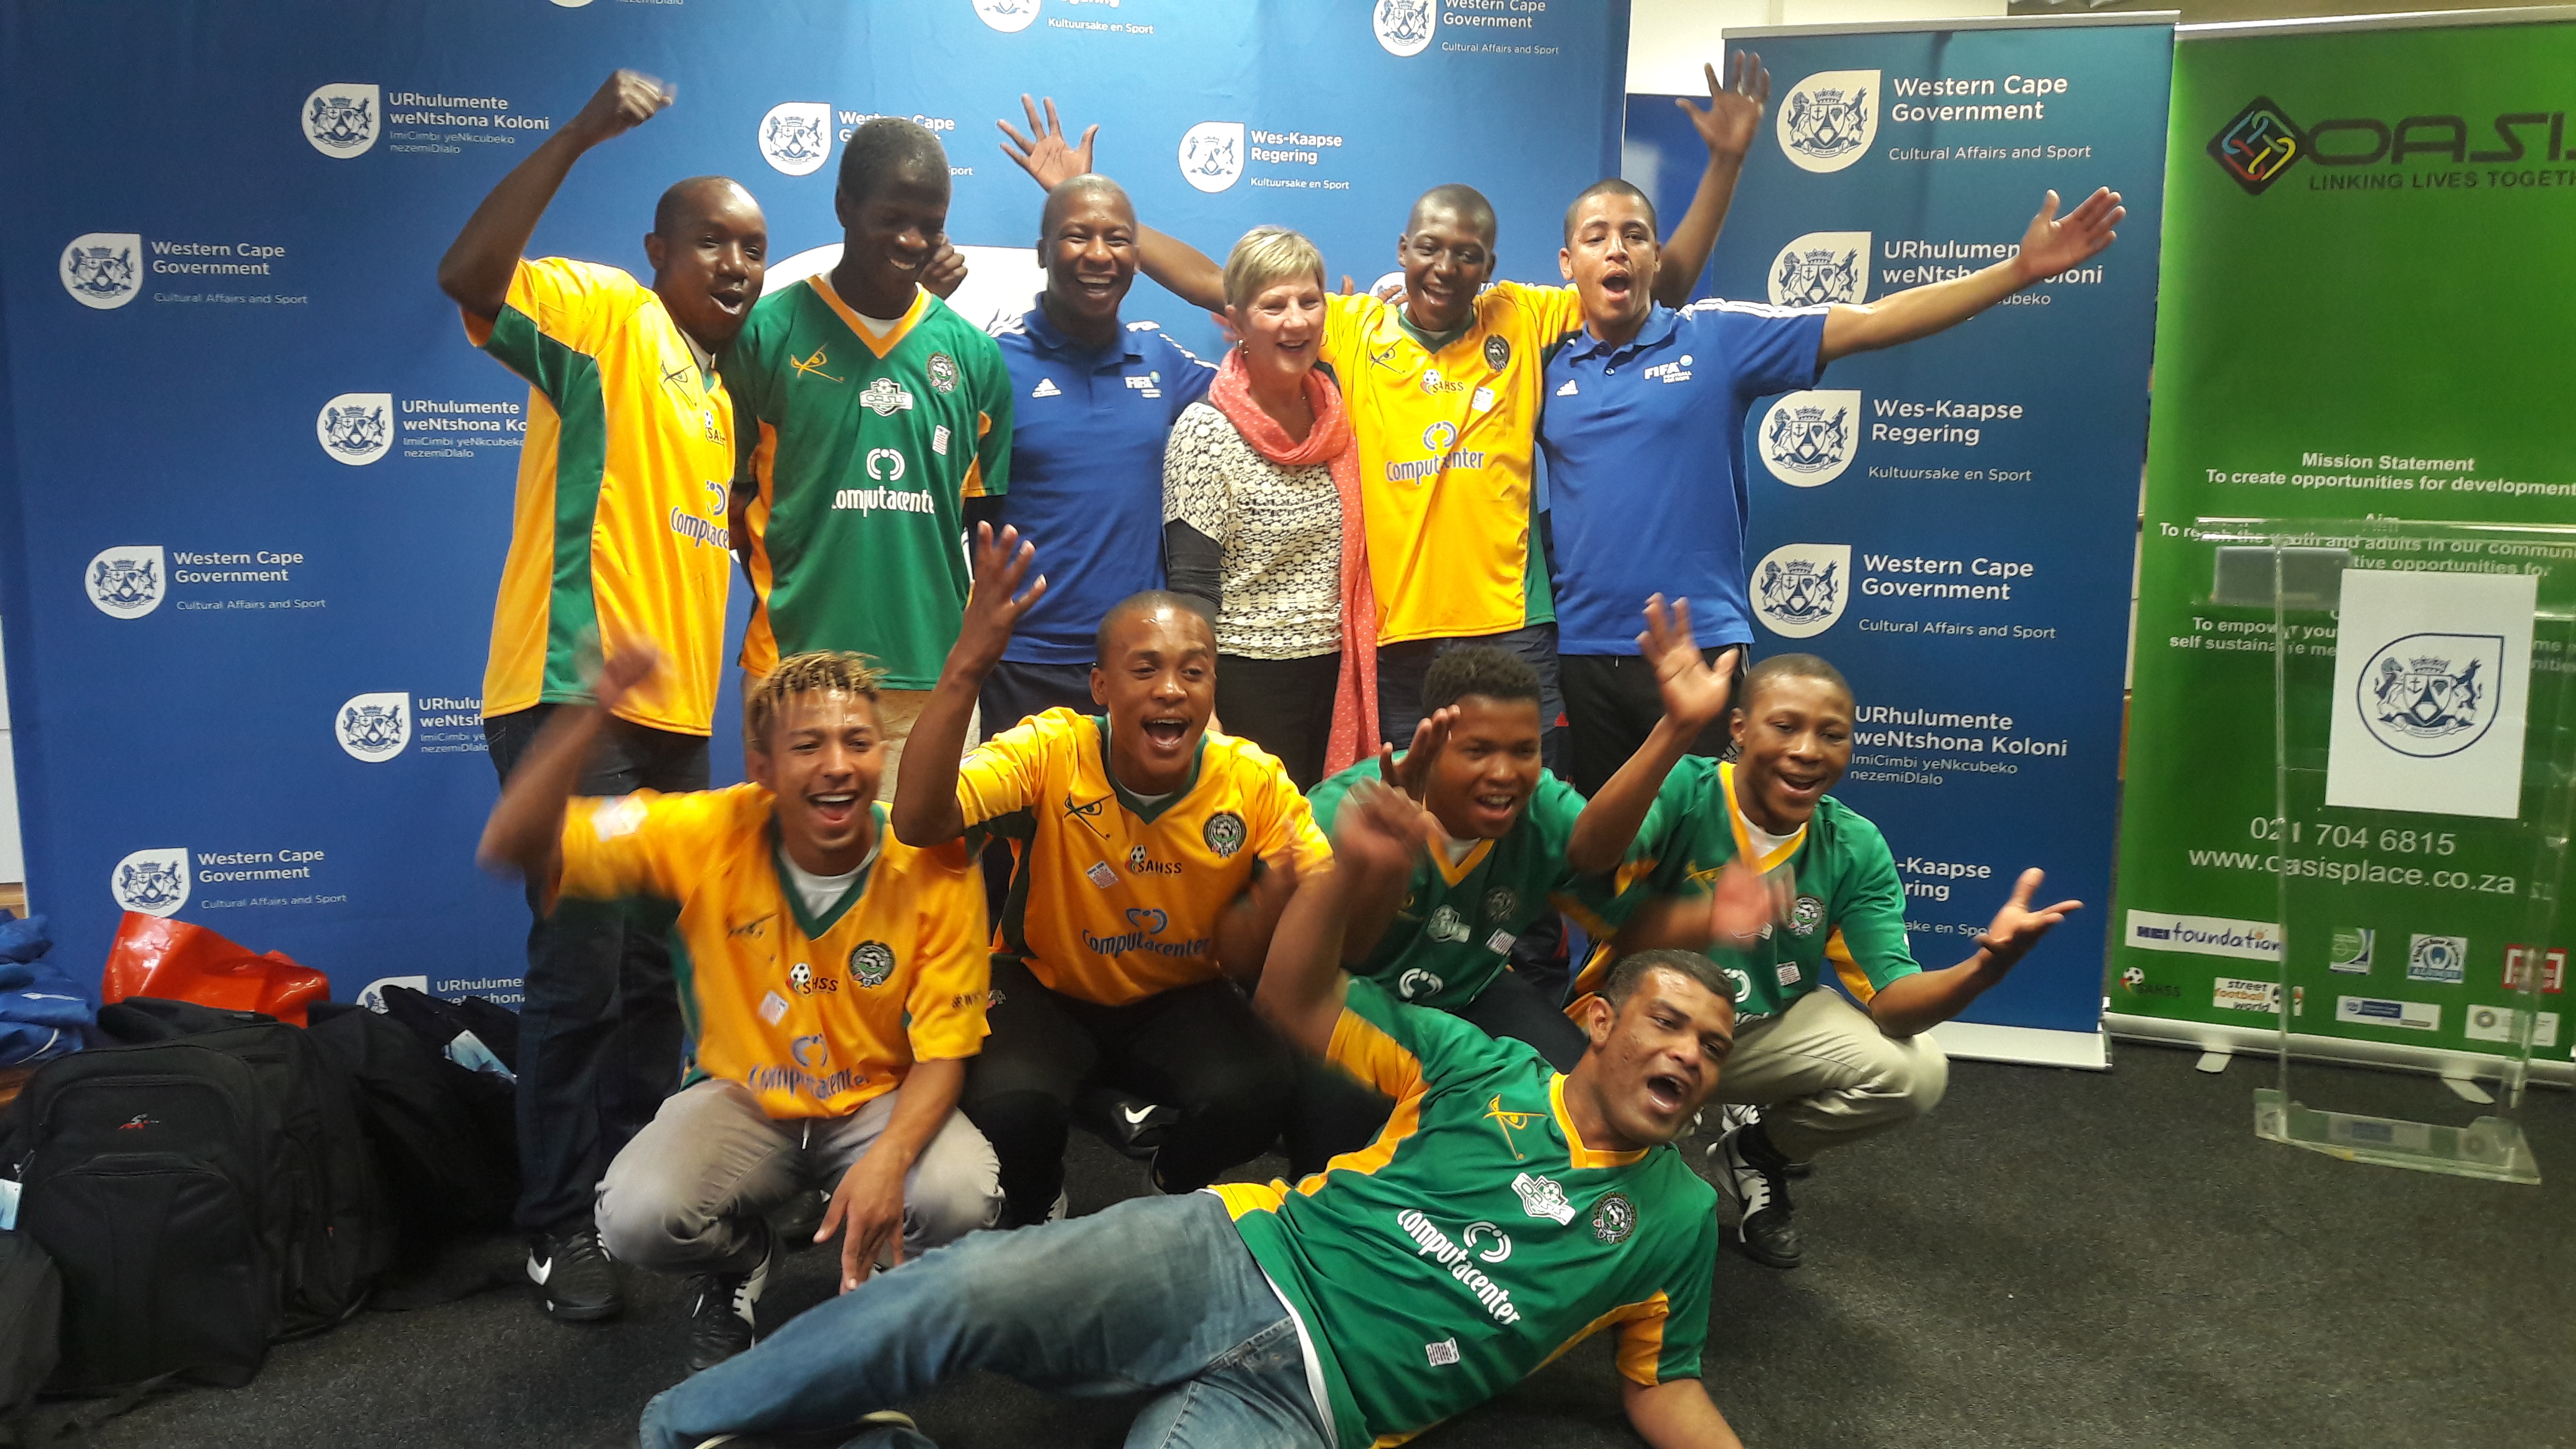 Minister Anroux Marais with South Africa’s 2017 Homeless Street Soccer World Cup